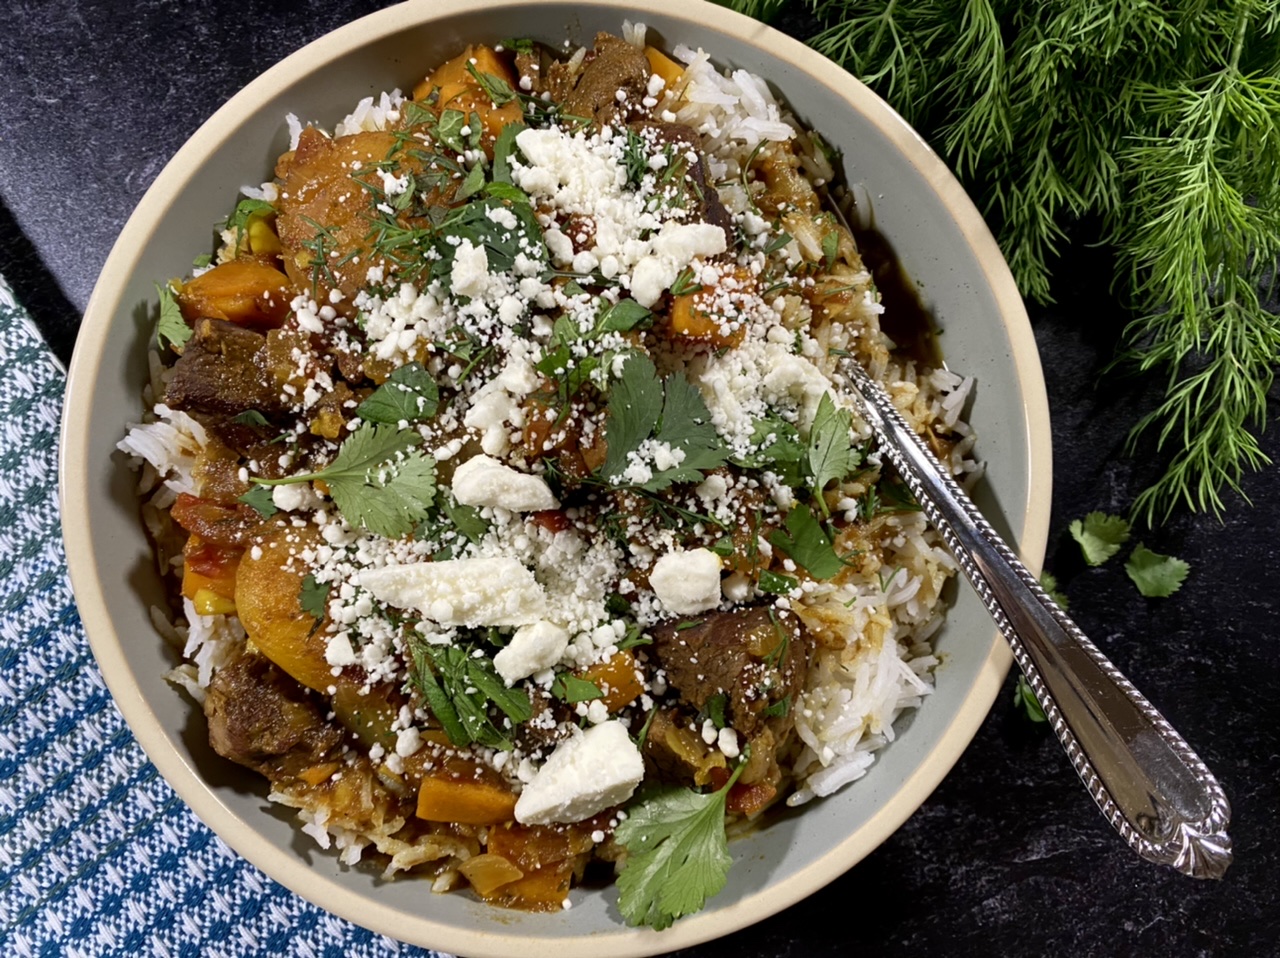 EA10923A 2970 4D01 8D43 F0452DAB96DD - Persian Style Lamb & Sweet Potato Stew with Apricots & Herbs